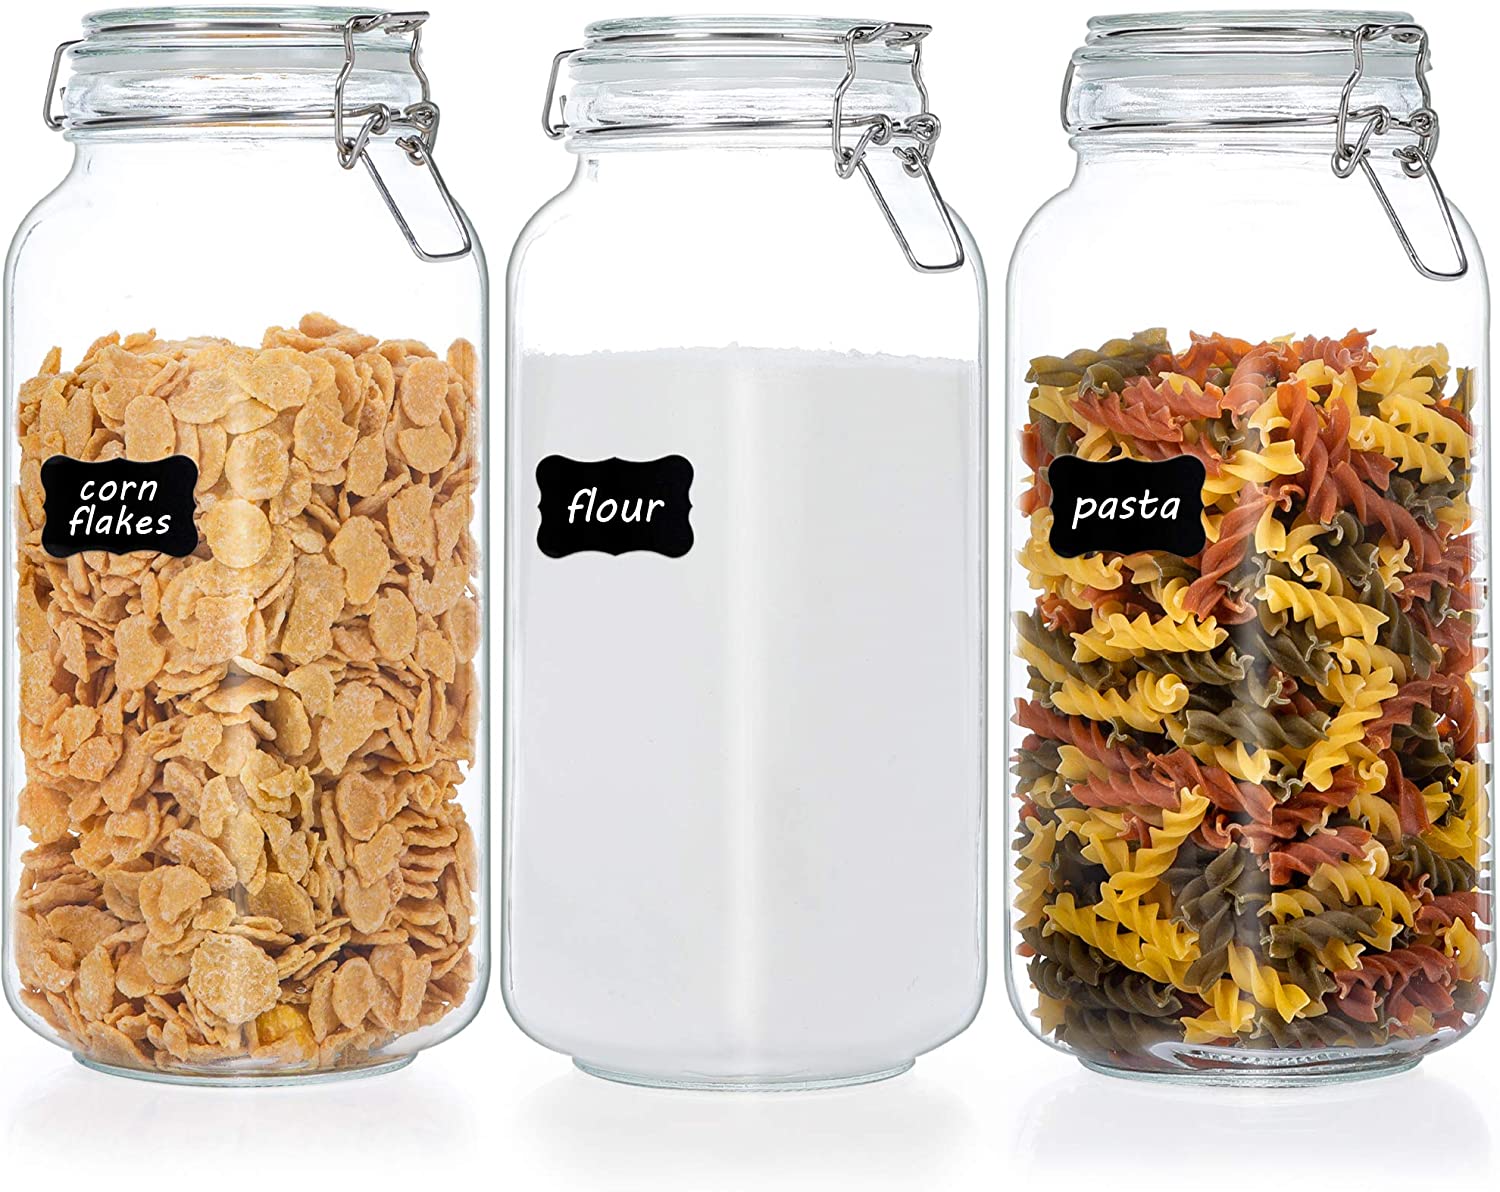 Vtopmart 78oz Glass Food Storage Jars with Airtight Clamp Lids, 3 Pack  Large Kitchen Canisters for Flour, Cereal, Coffee, Pasta and Canning,  Square